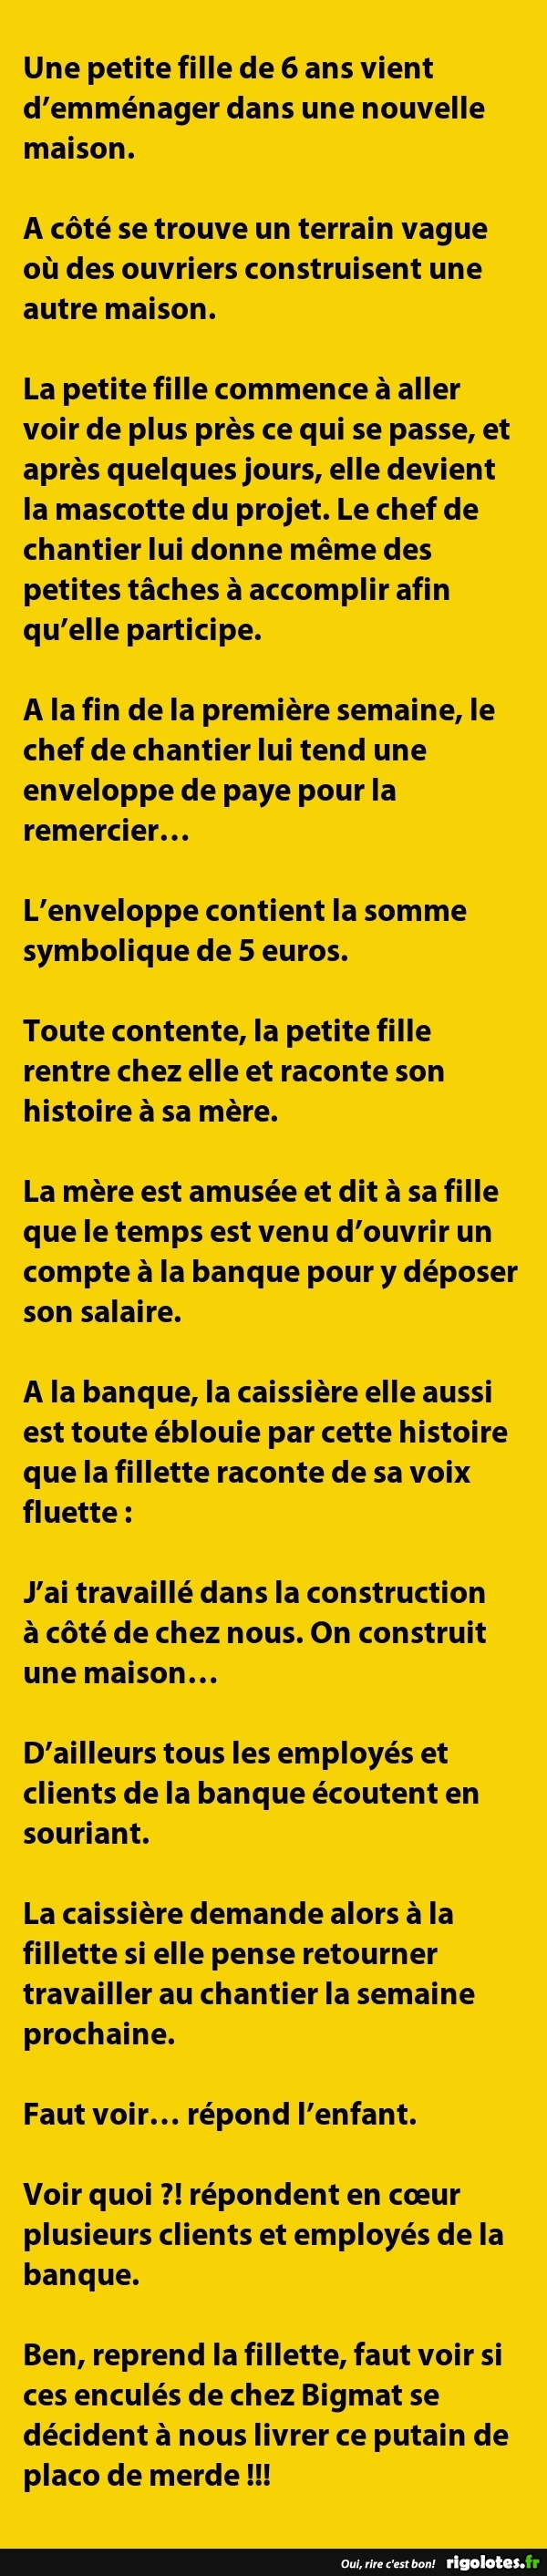 humour - Page 33 20210278